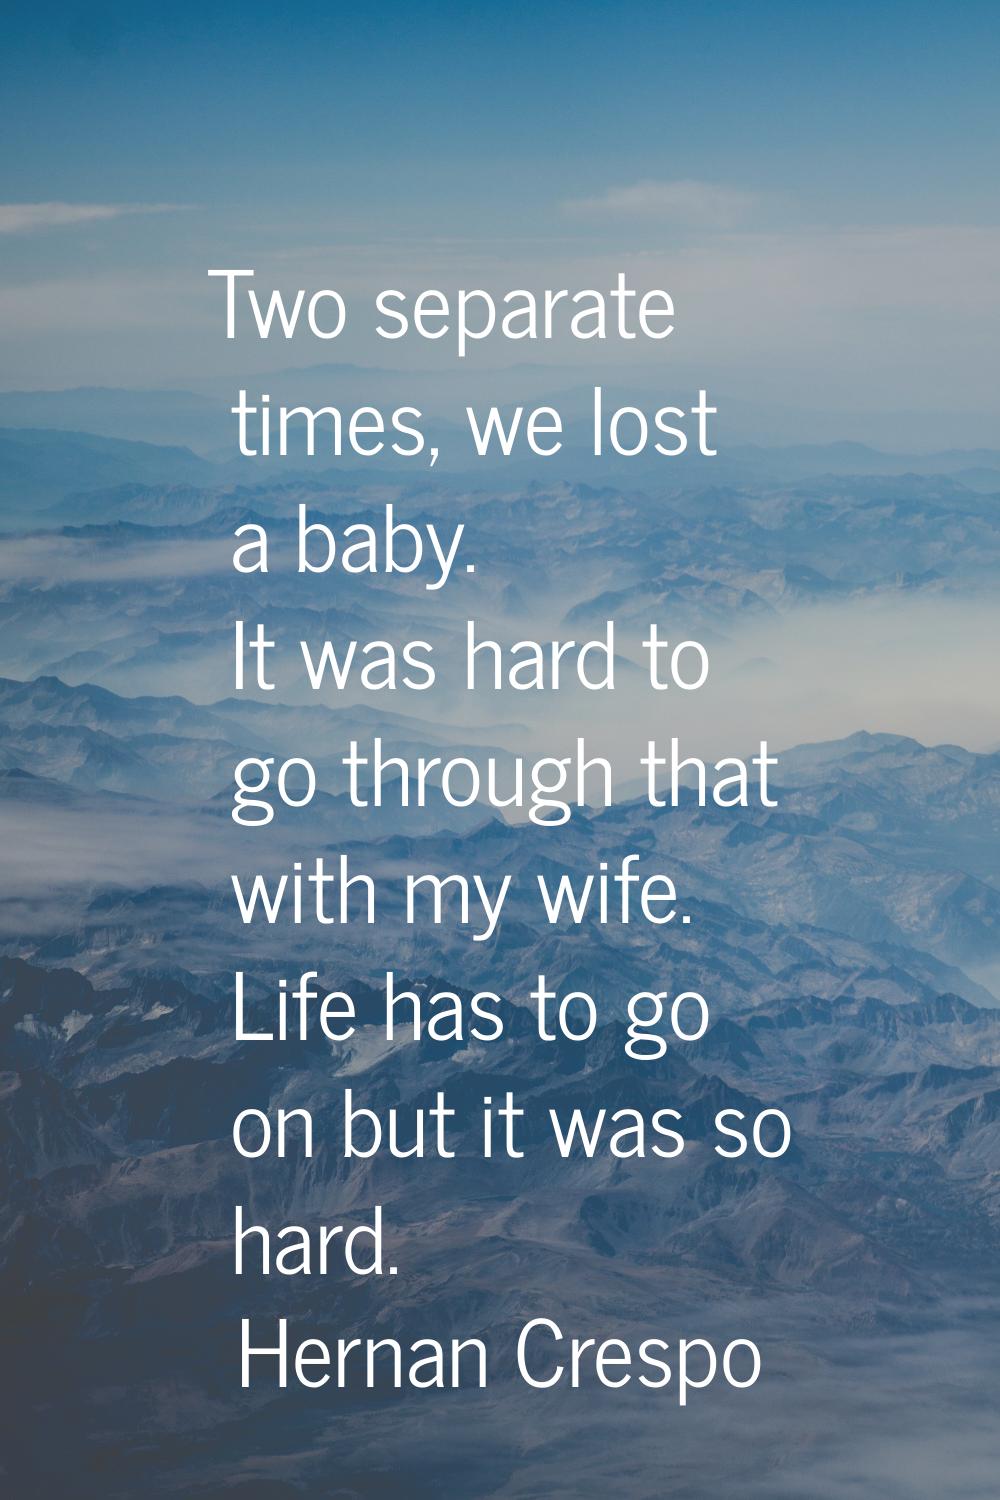 Two separate times, we lost a baby. It was hard to go through that with my wife. Life has to go on 